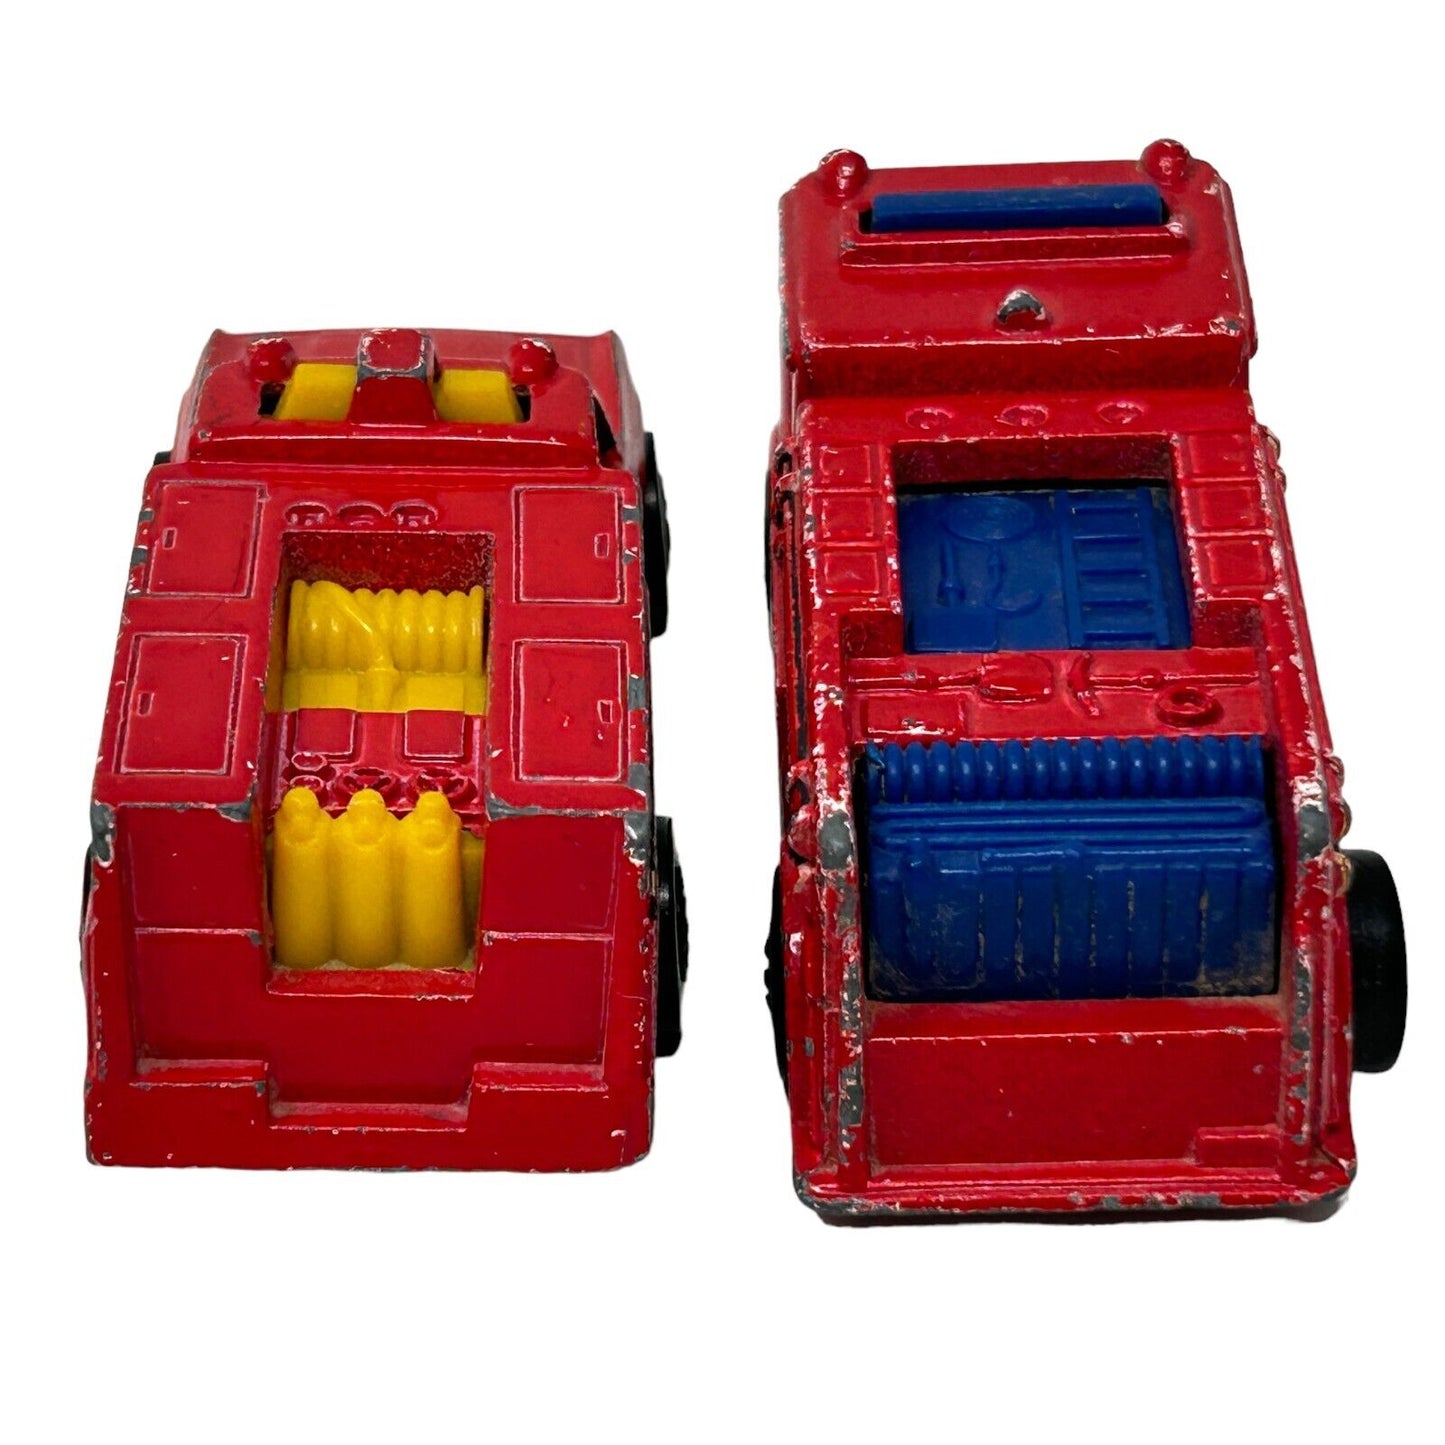 Lot of 2 Emergency Fire Engine Trucks Hot Wheels Diecast Cars Red Vintage 80s